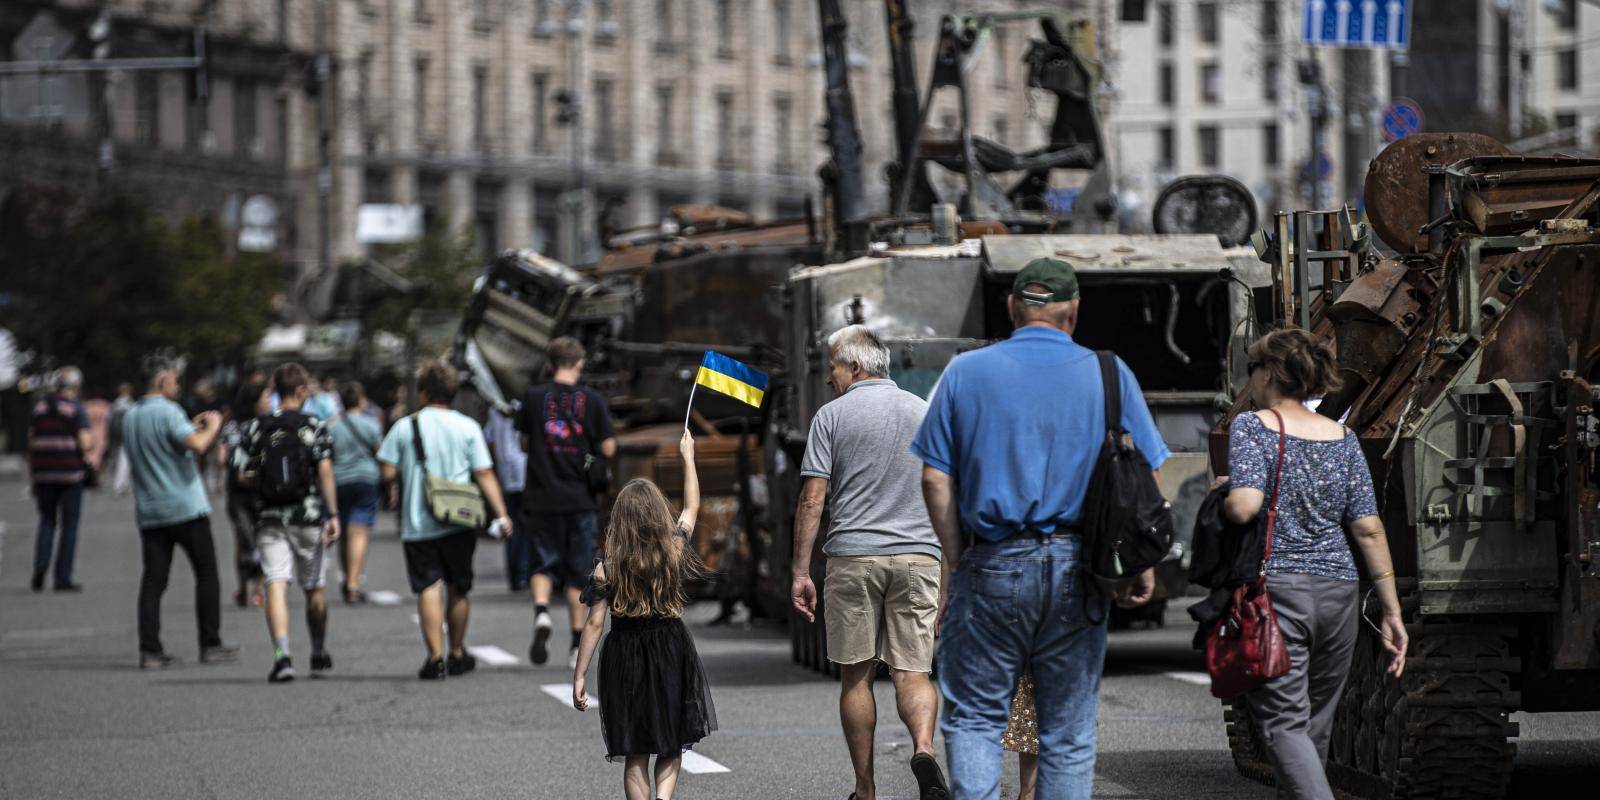 People walking down a street in Kyiv past seized military equipment including tanks and motorized artillery.